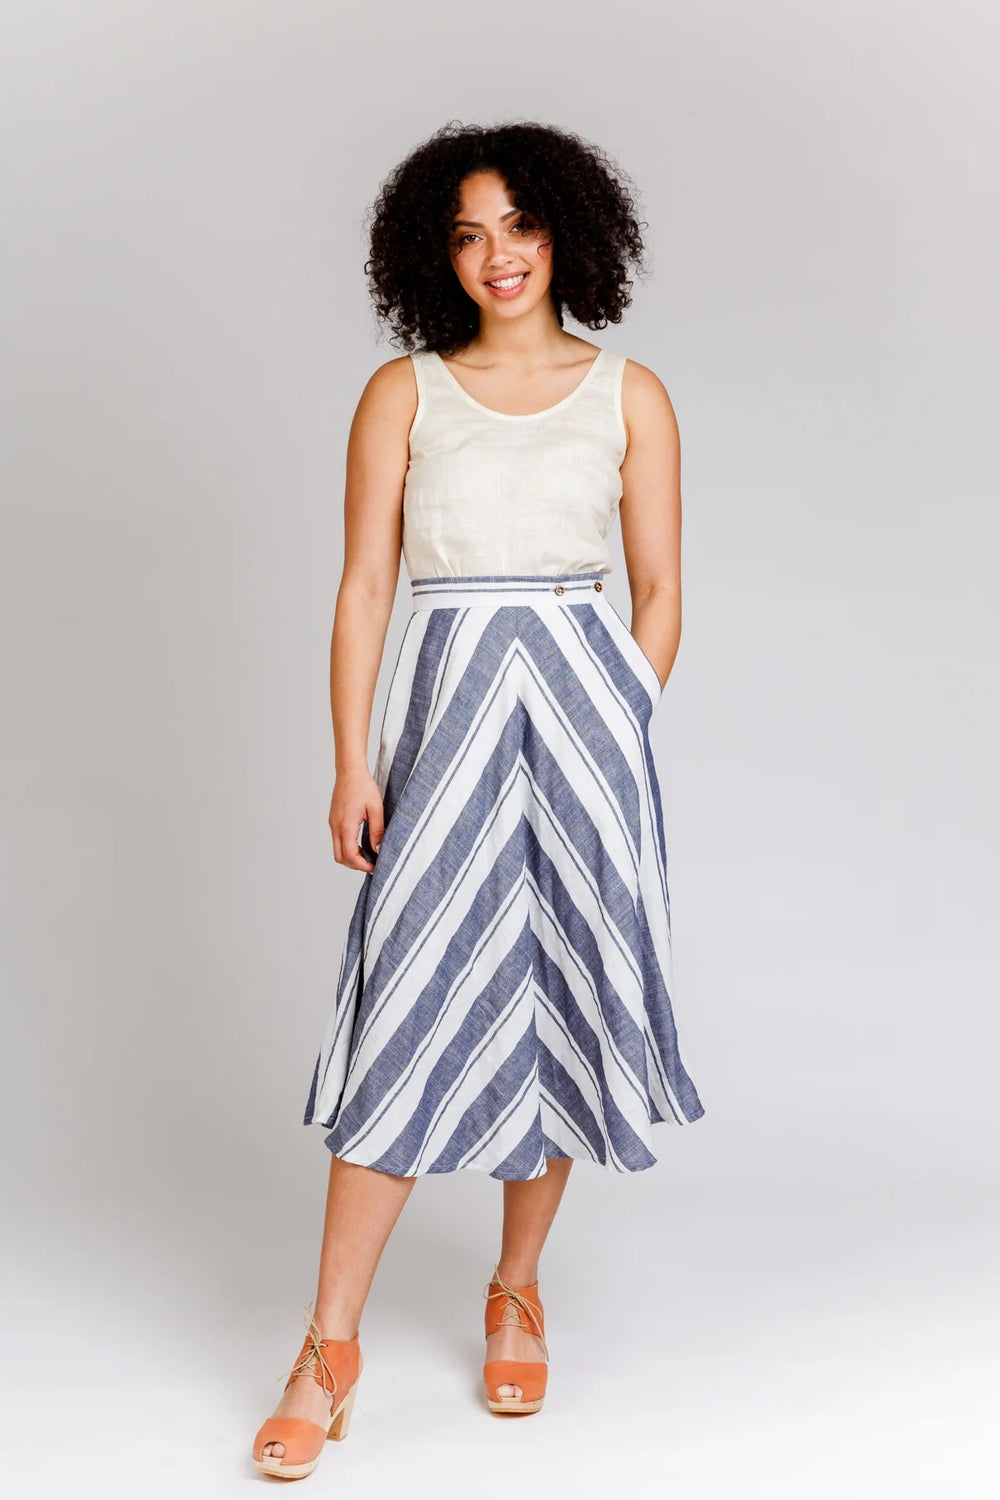 Woman wearing the Wattle Skirt sewing pattern from Megan Nielsen on The Fold Line. A skirt pattern made in denim, twill, poplin, broadcloth, linens, suiting, gabardine, pique, wool blends, cottons, rayon, or silks fabrics, featuring a midi length, bias cu